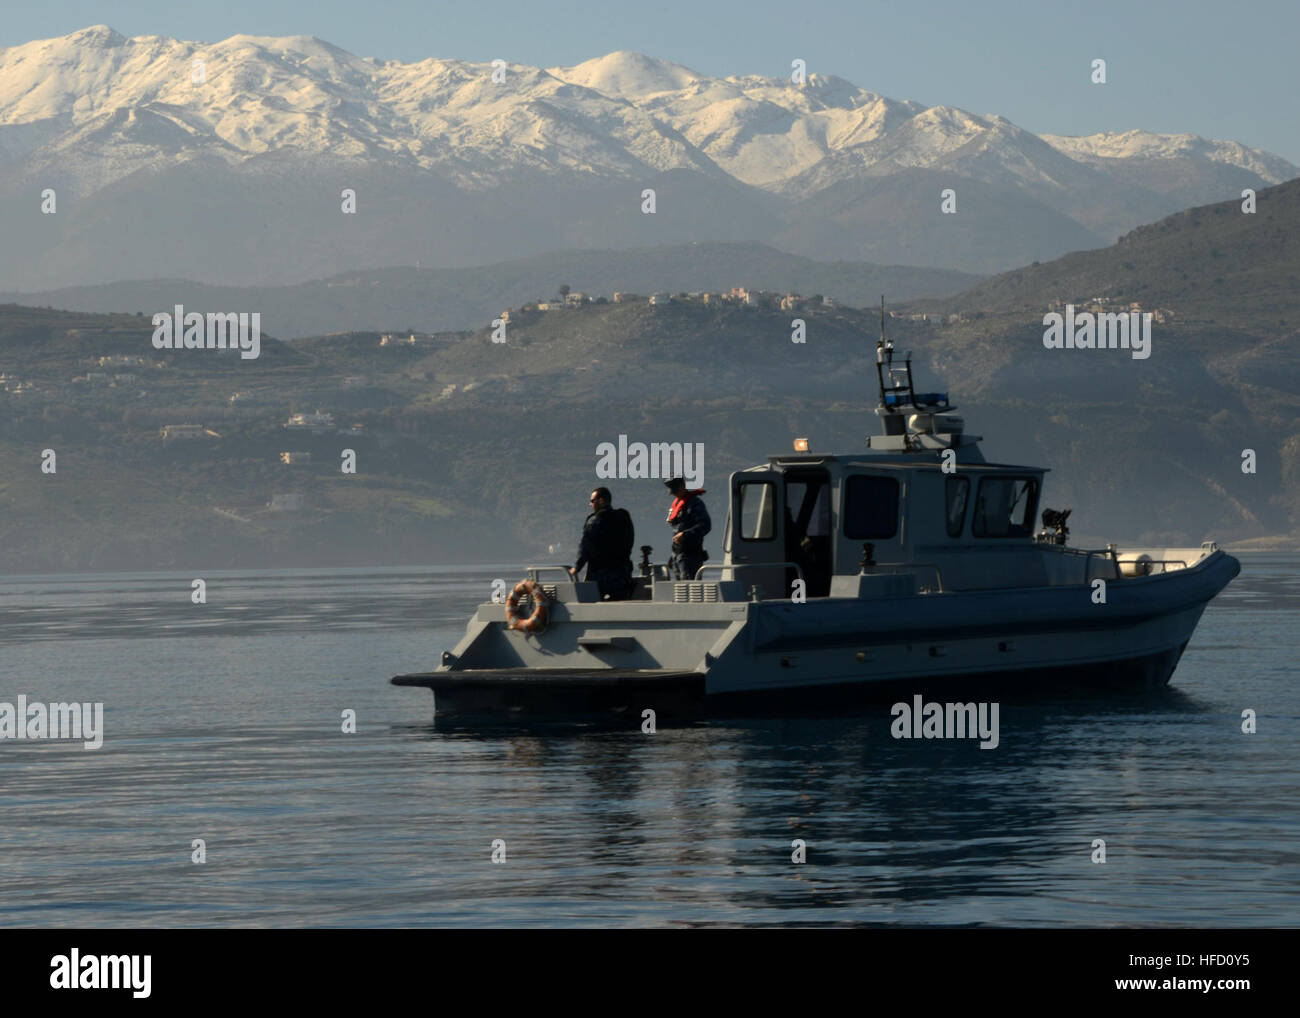 SOUDA BAY, Greece (Feb. 2, 2016) Sailors assigned to Naval Support Activity Souda Bay Harbor Security, perform a routine patrol of Souda Bay aboard a 36-foot patrol boat.  U.S. 6th Fleet, headquartered in Naples, Italy, conducts the full spectrum of joint and naval operations, often in concert with allied, joint, and interagency partners, in order to advance U.S. national interests and security and stability in Europe and Africa. (U.S. Navy photo by Heather Judkins/Released)160202-N-IL474-035 Join the conversation: http://www.navy.mil/viewGallery.asp http://www.facebook.com/USNavy http://www.t Stock Photo